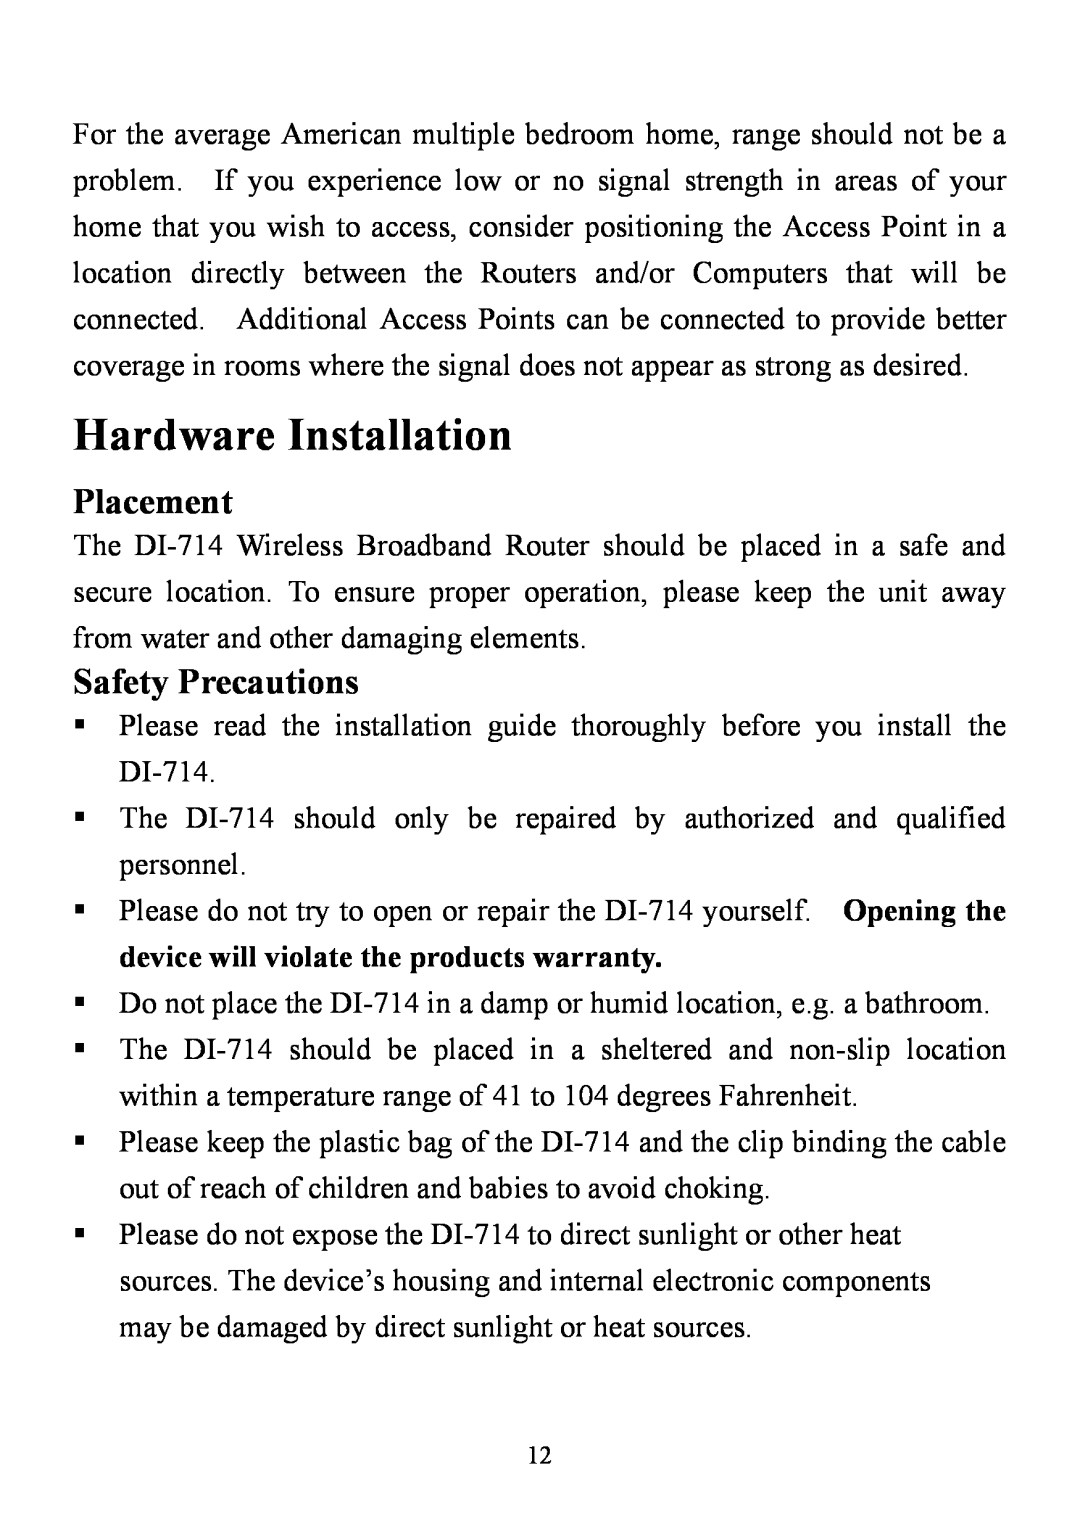 D-Link DI-714 user manual Hardware Installation, Placement, Safety Precautions, device will violate the products warranty 